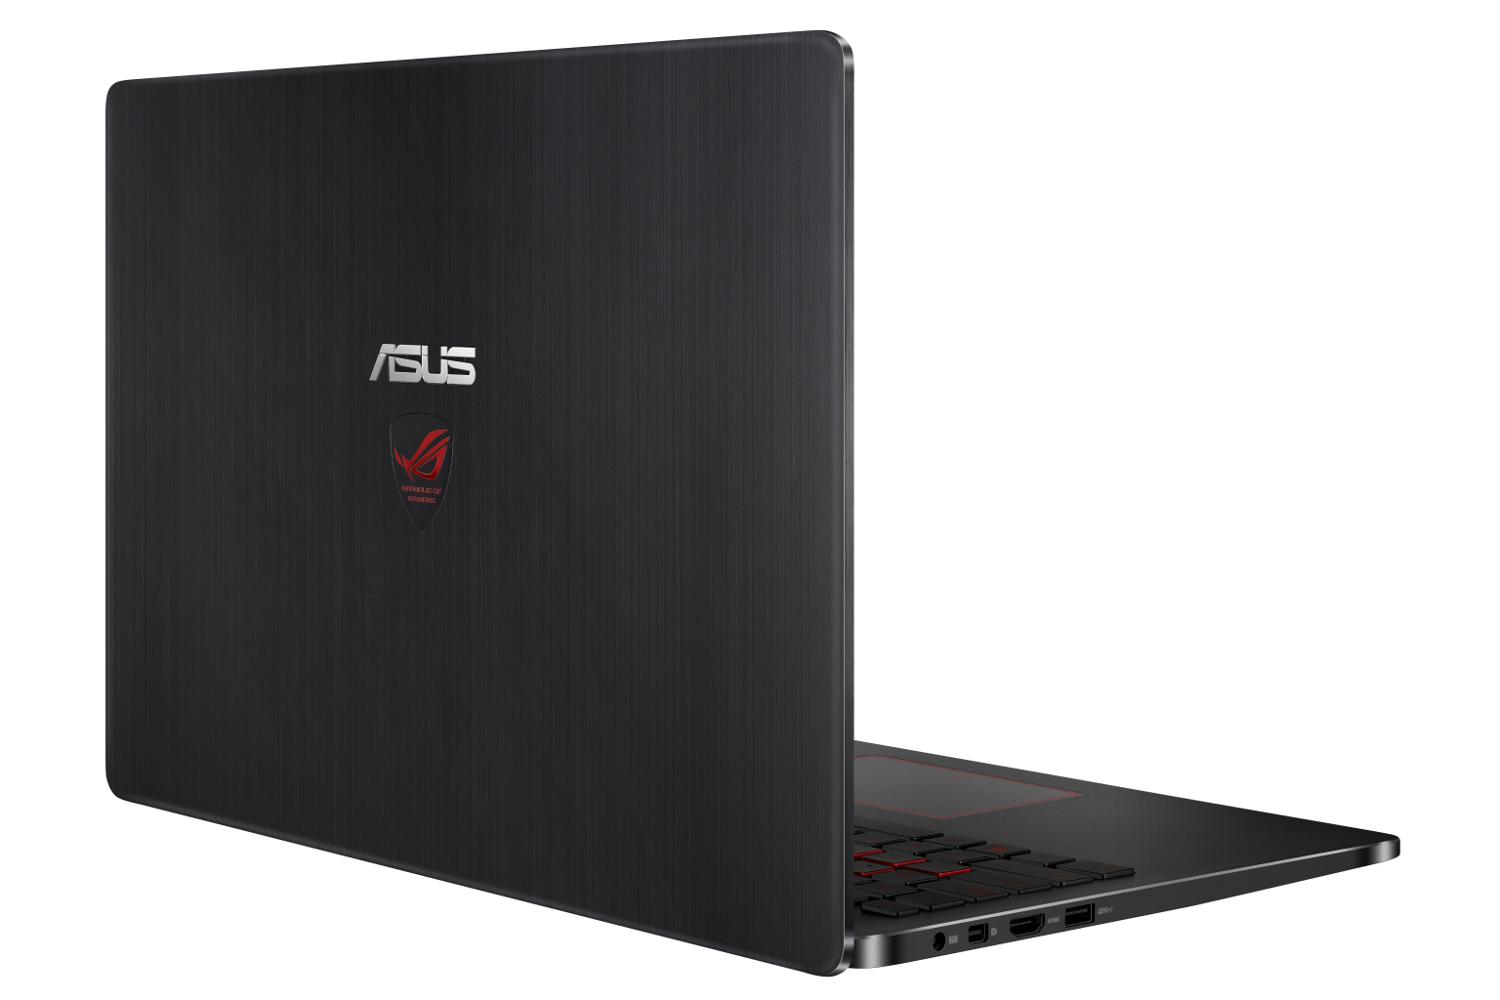 asus announces new lightweight g501 gaming laptop right back open90